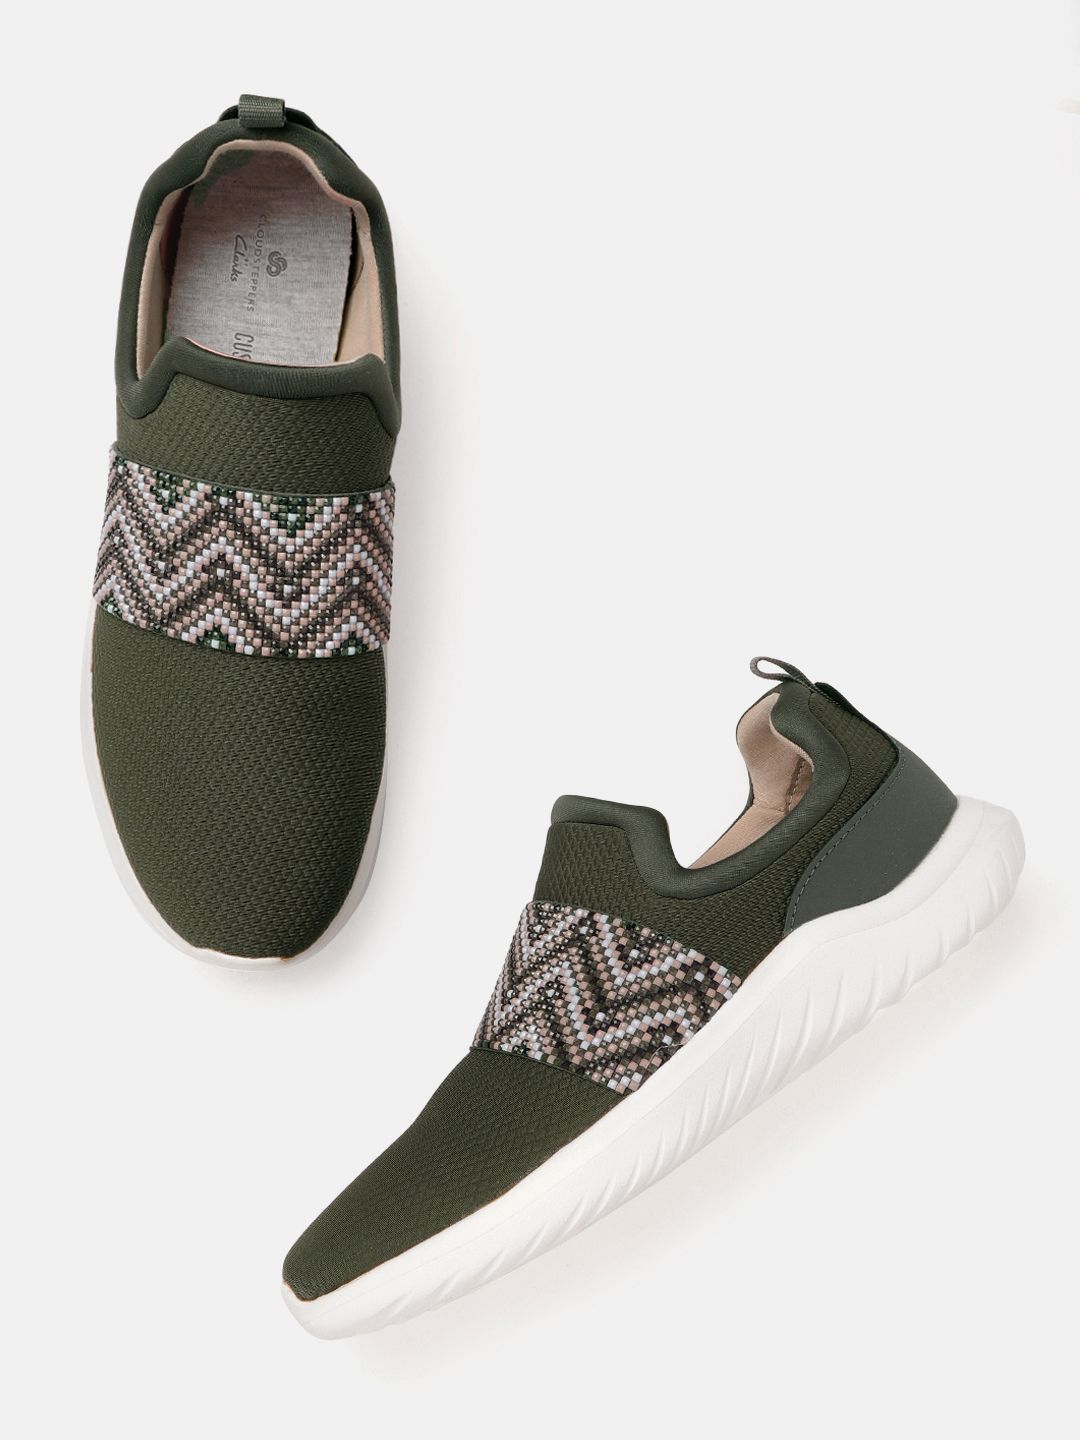 Clarks Women Olive Green & White Woven Design Slip-On Sneakers Price in India